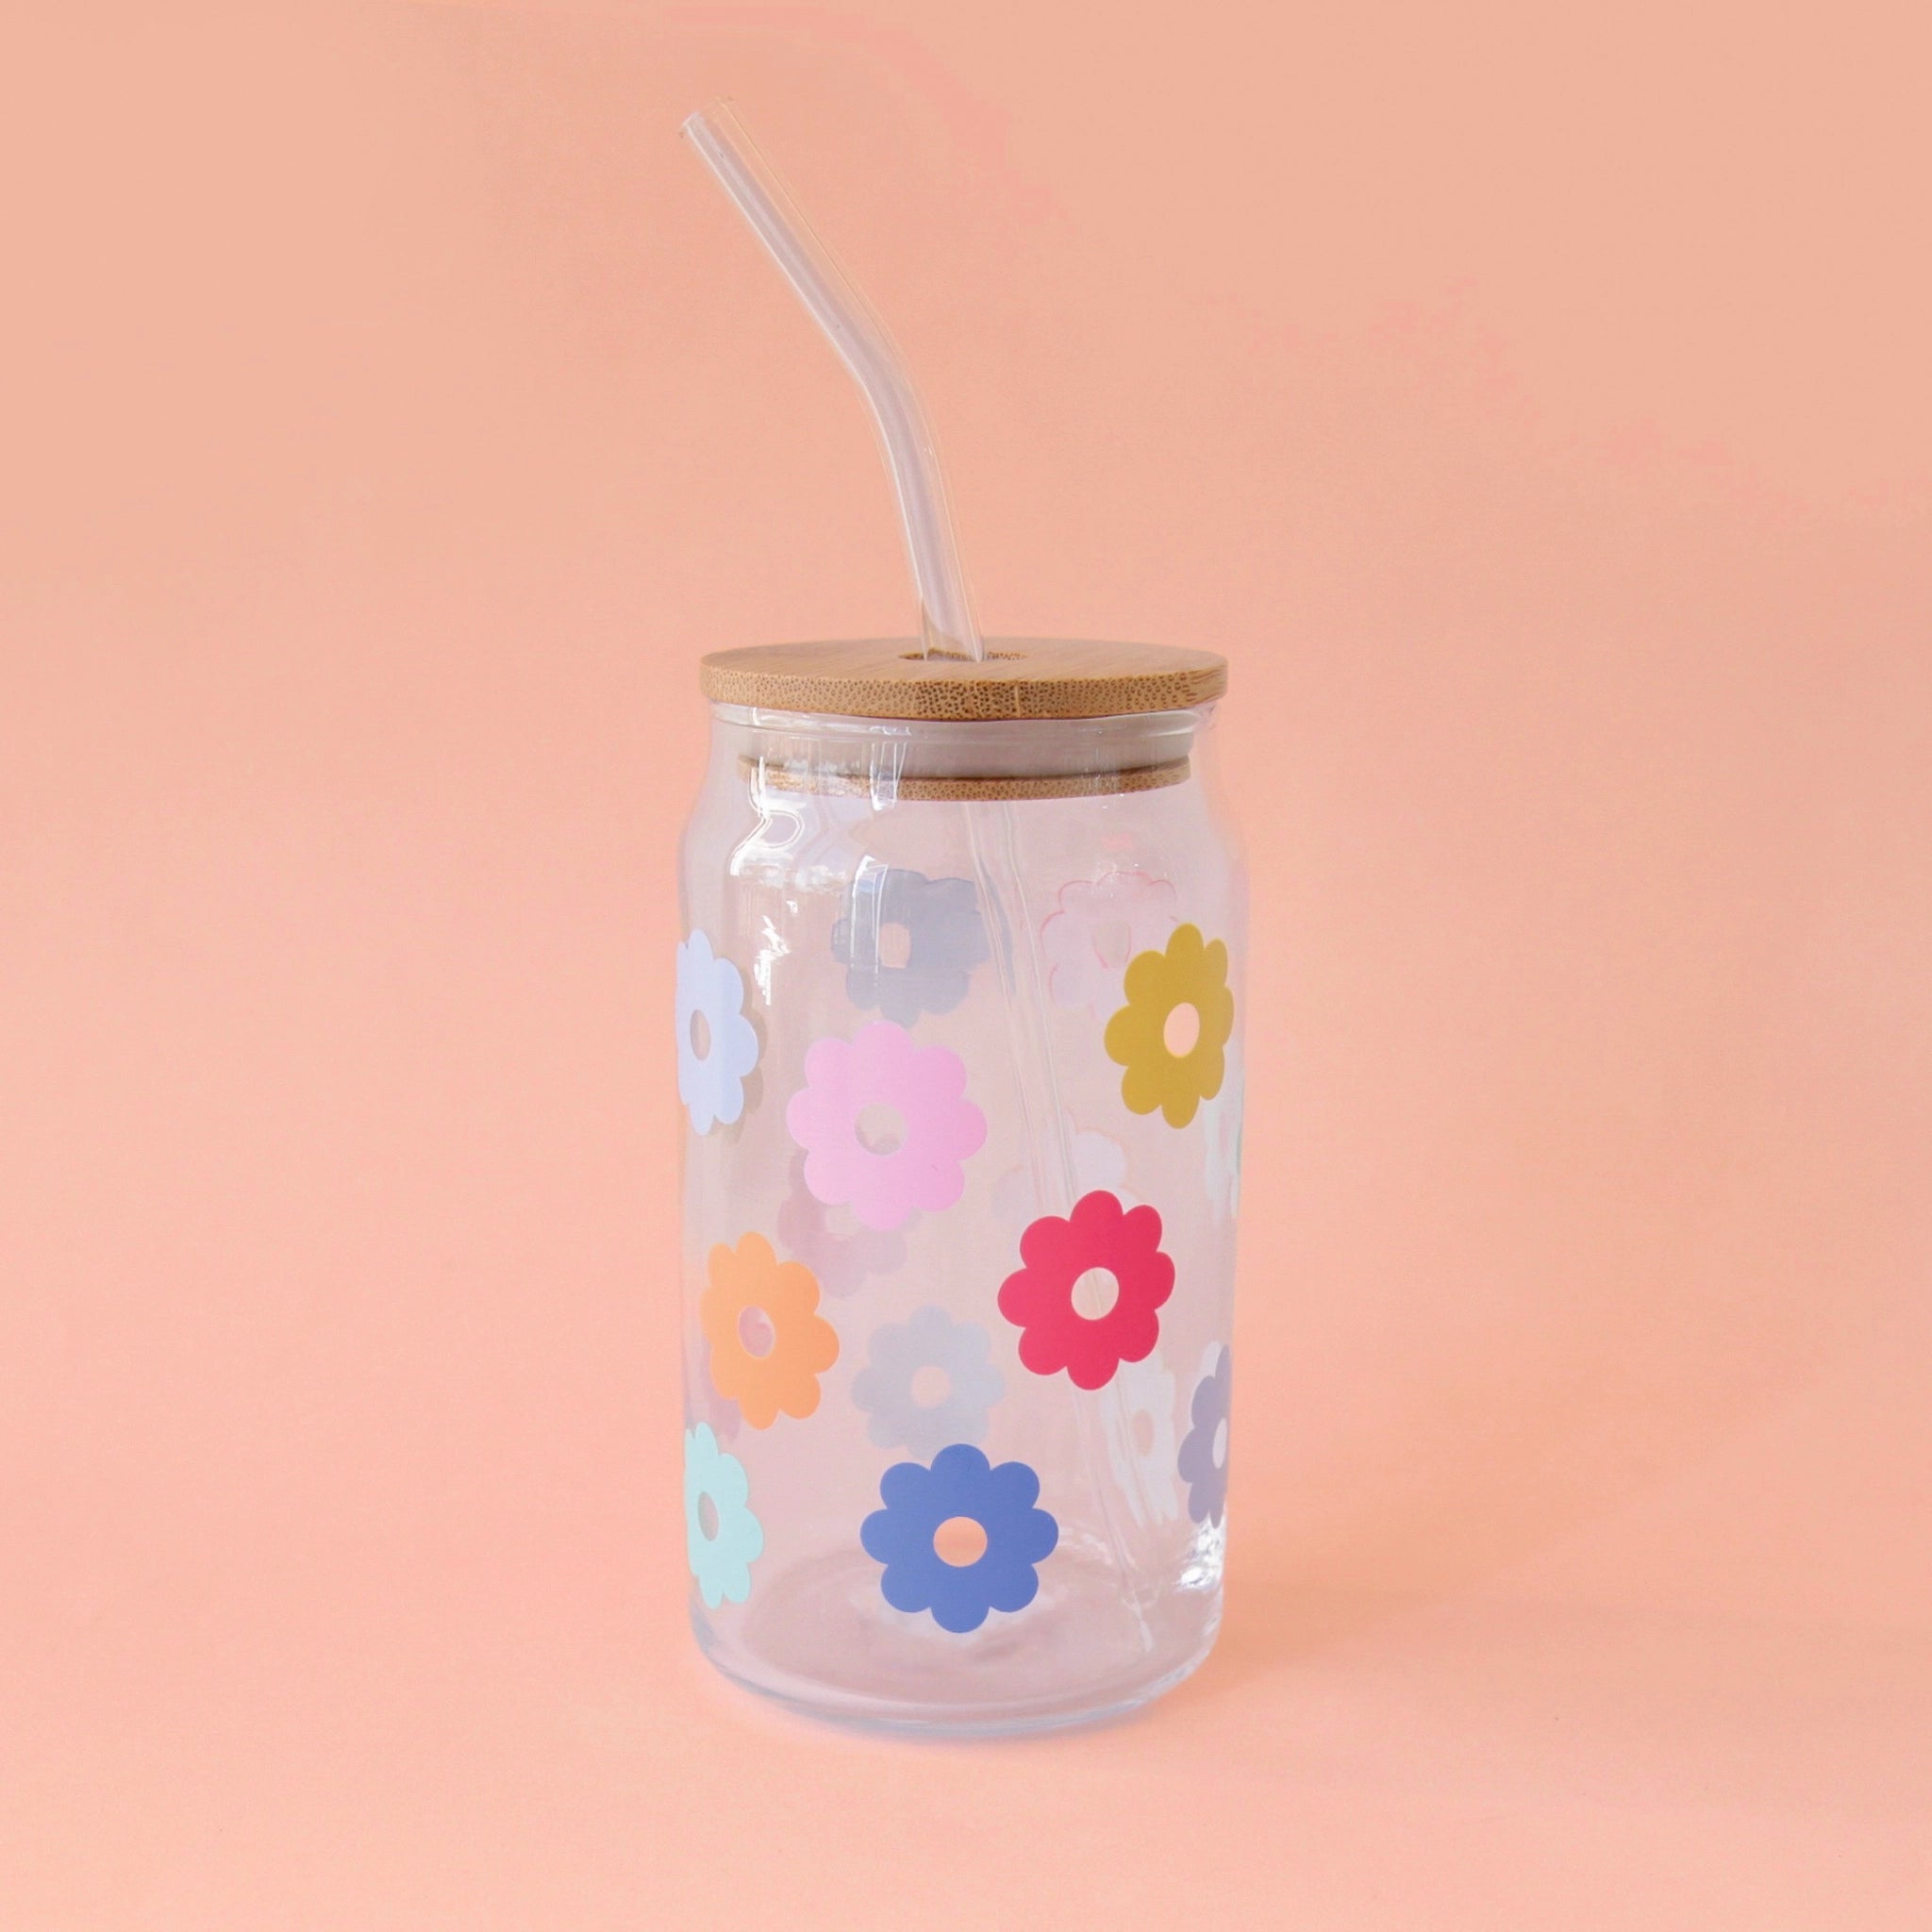 A glass tumbler with multi colored daisies and a wooden lid and a glass straw.